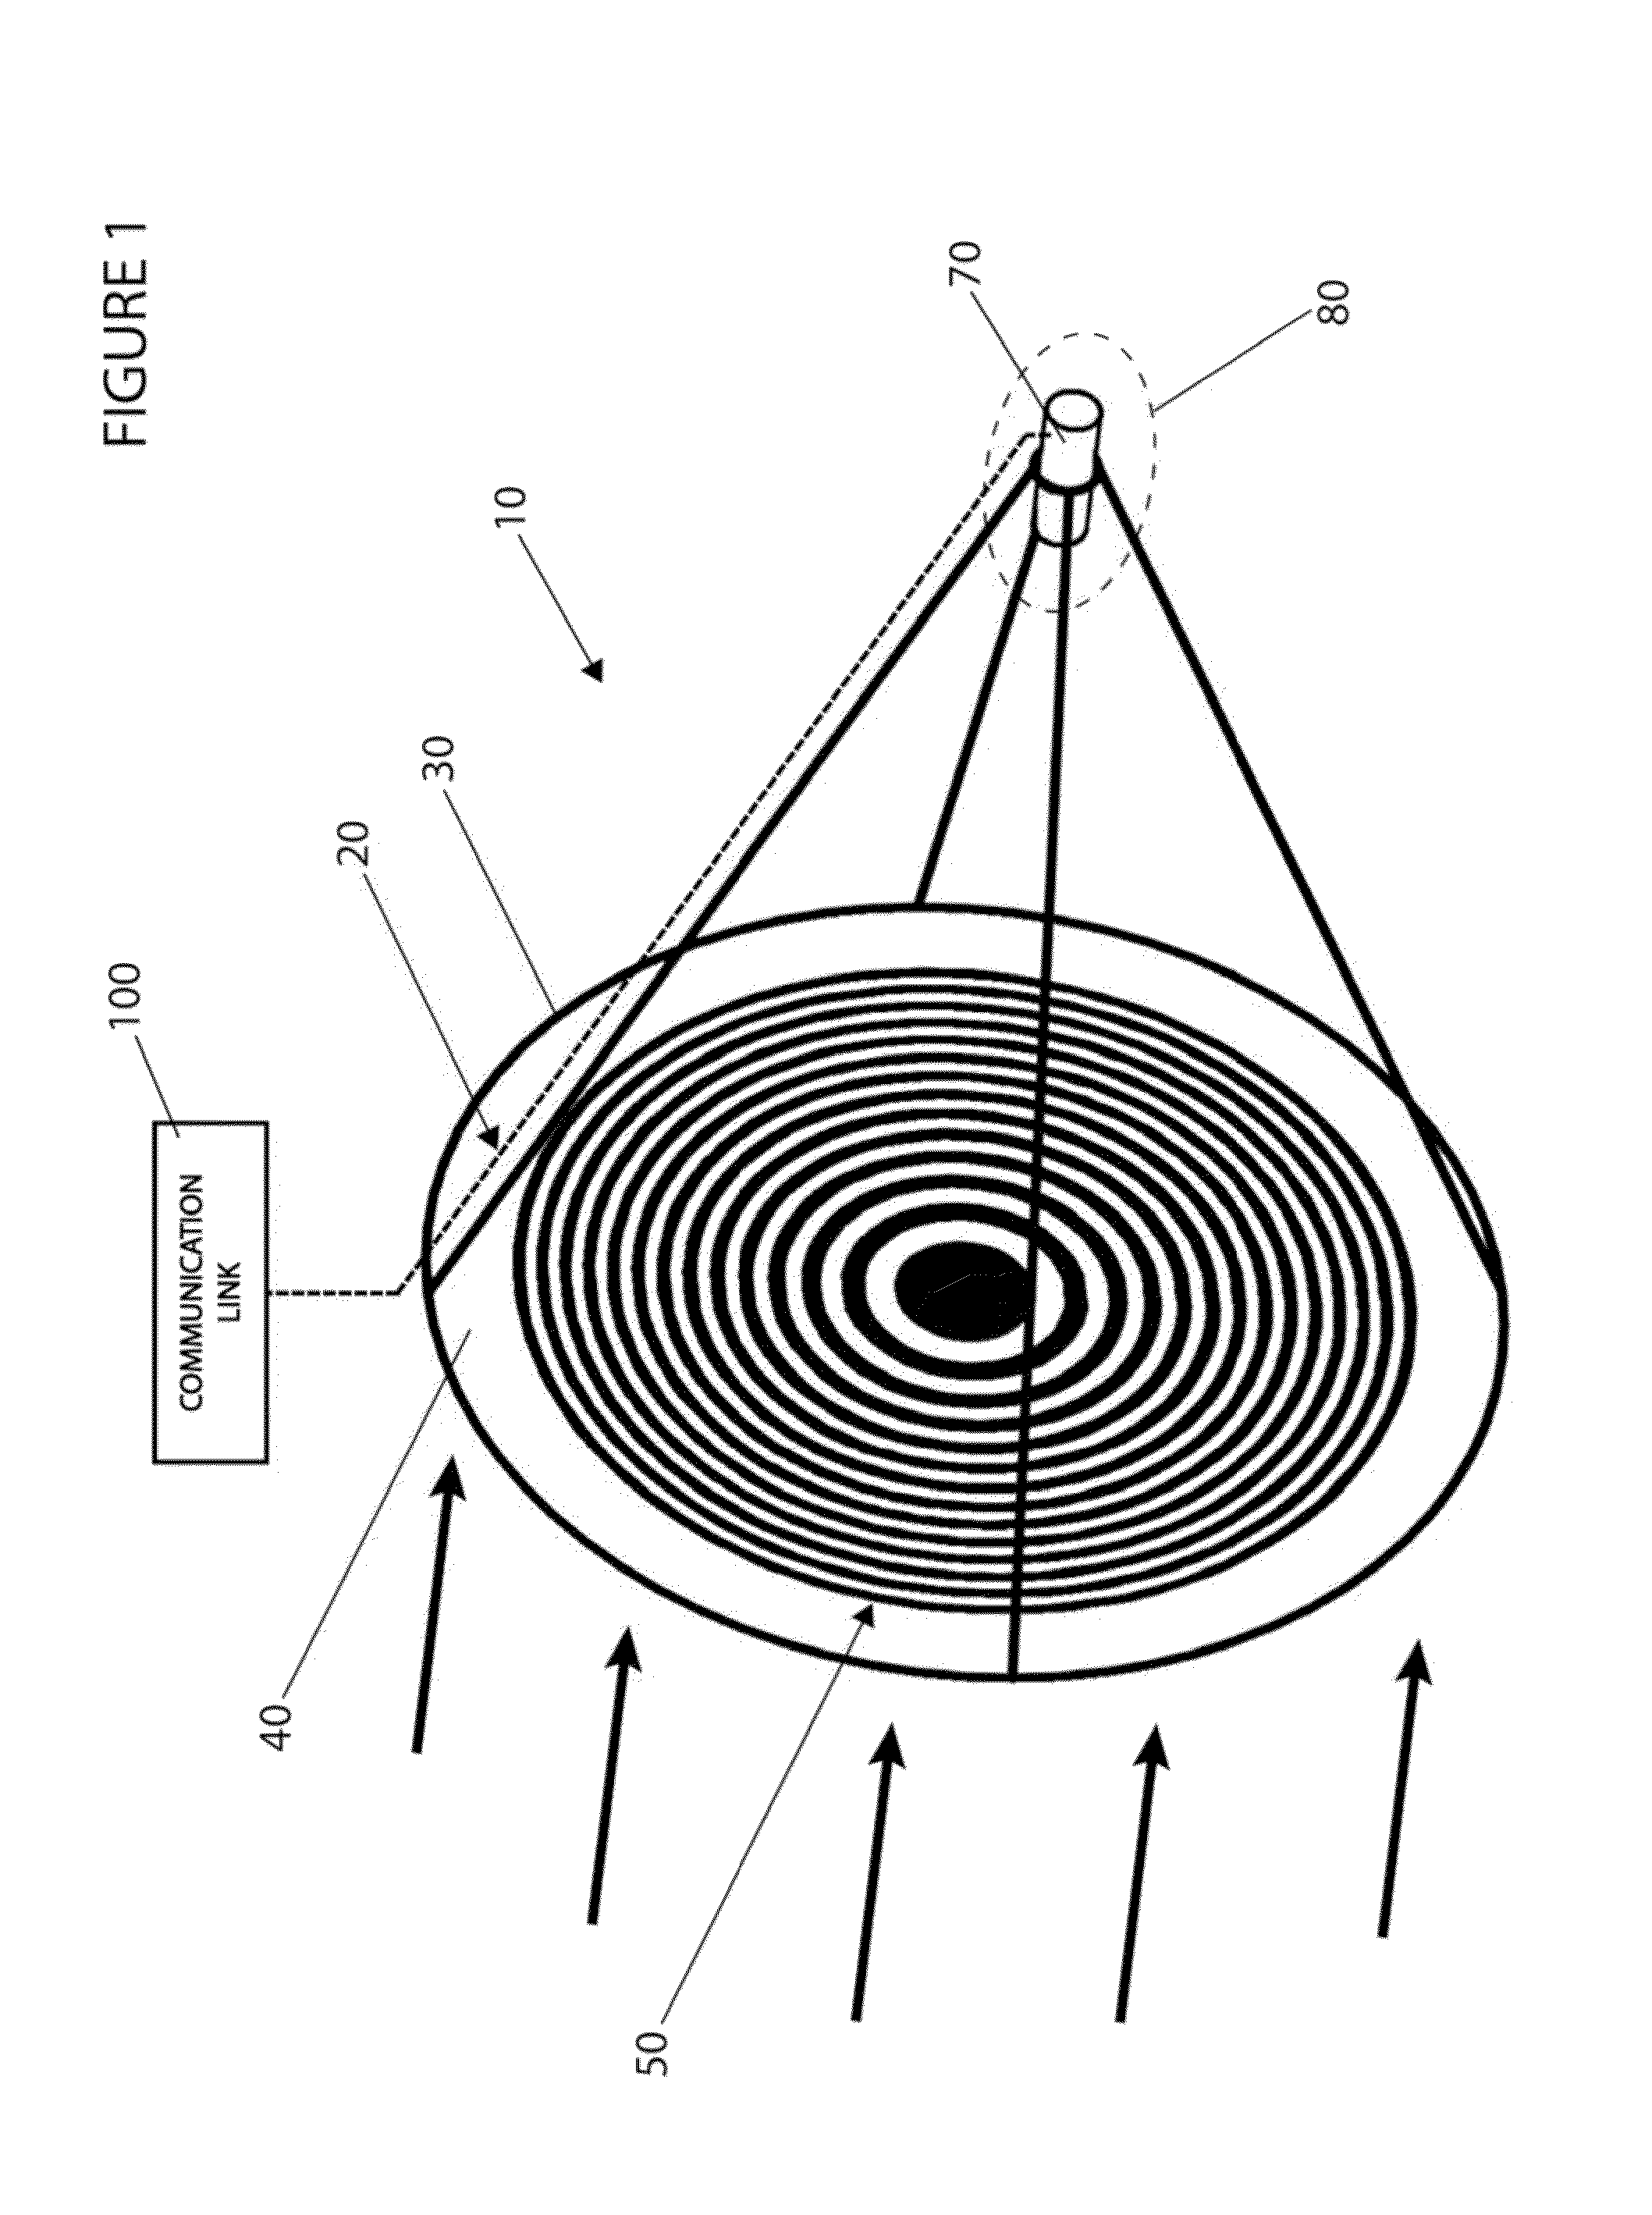 Acoustic fresnel zone plate lens for aqueous environments and methods of using same